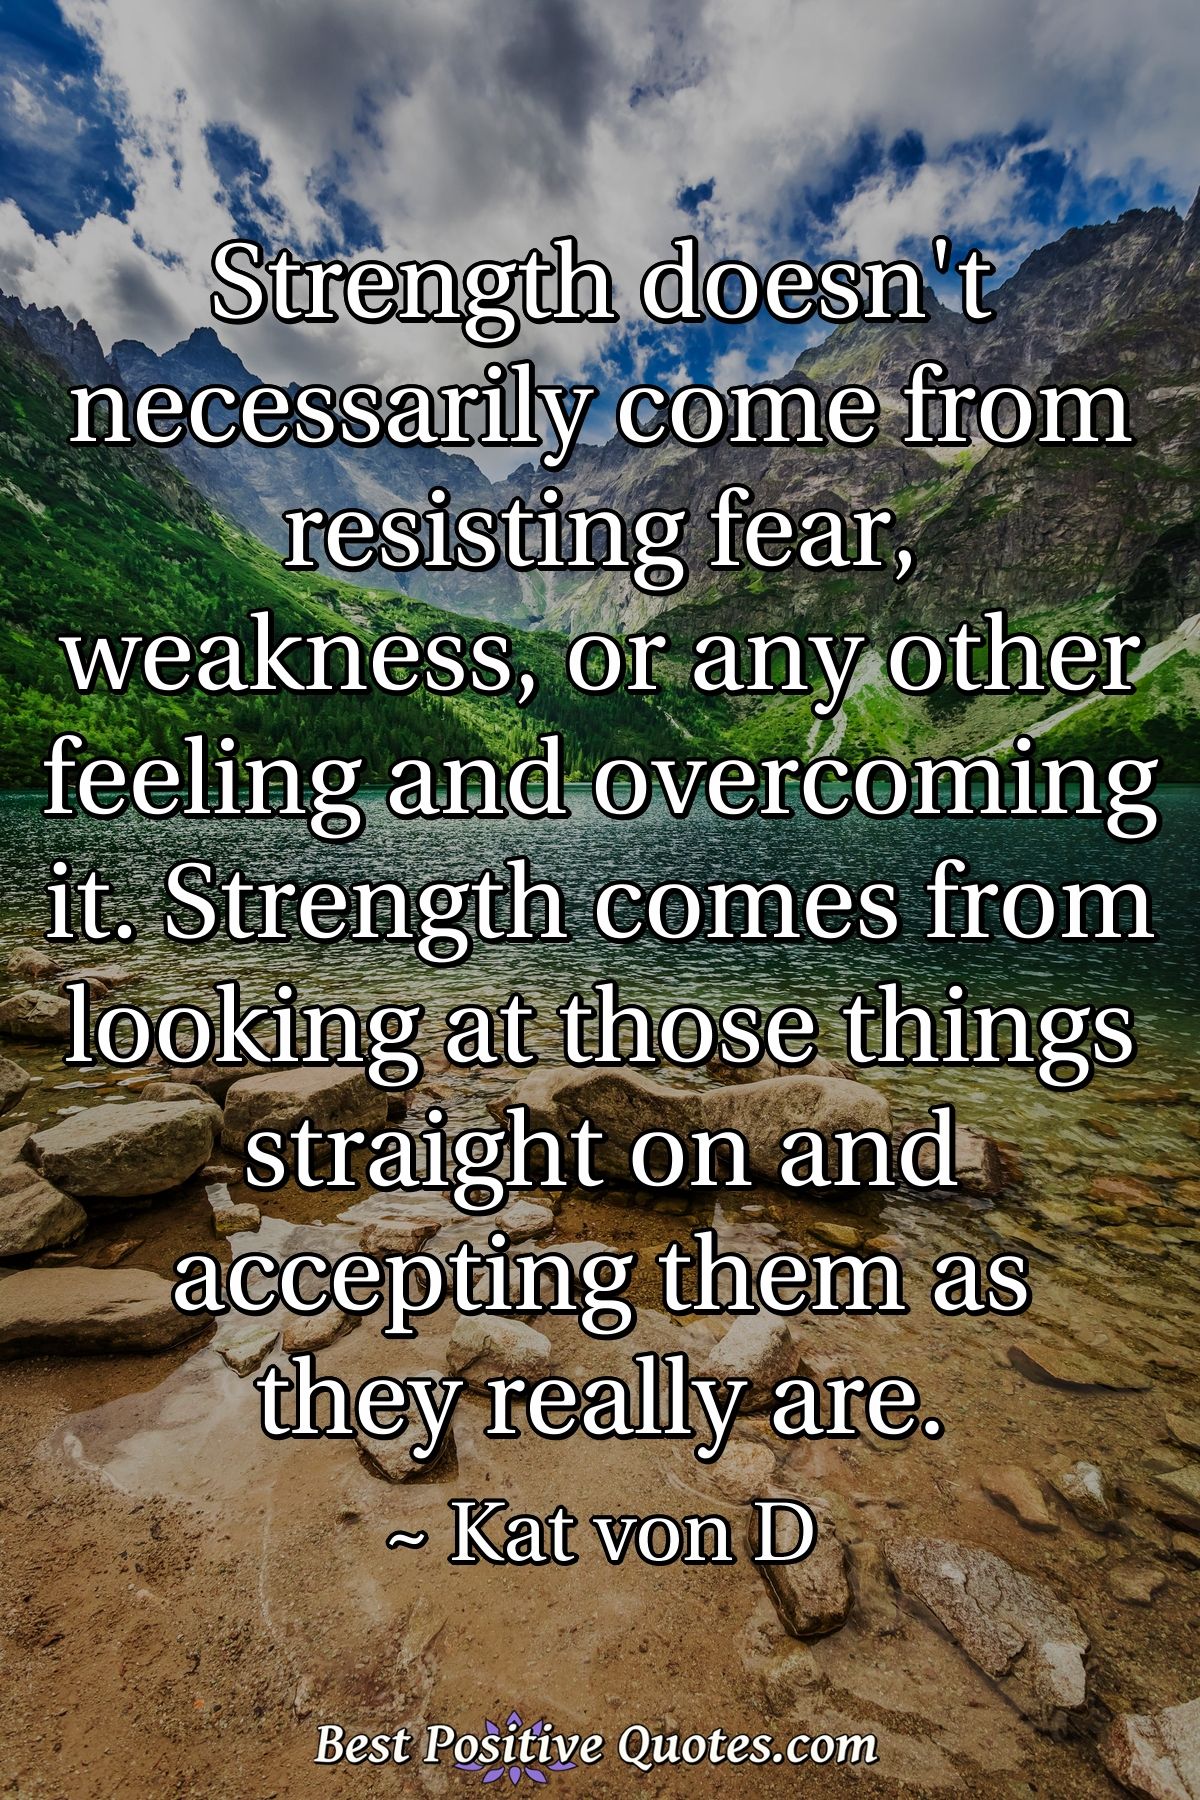 Strength doesn't necessarily come from resisting fear, weakness, or any other feeling and overcoming it. Strength comes from looking at those things straight on and accepting them as they really are. - Kat von D